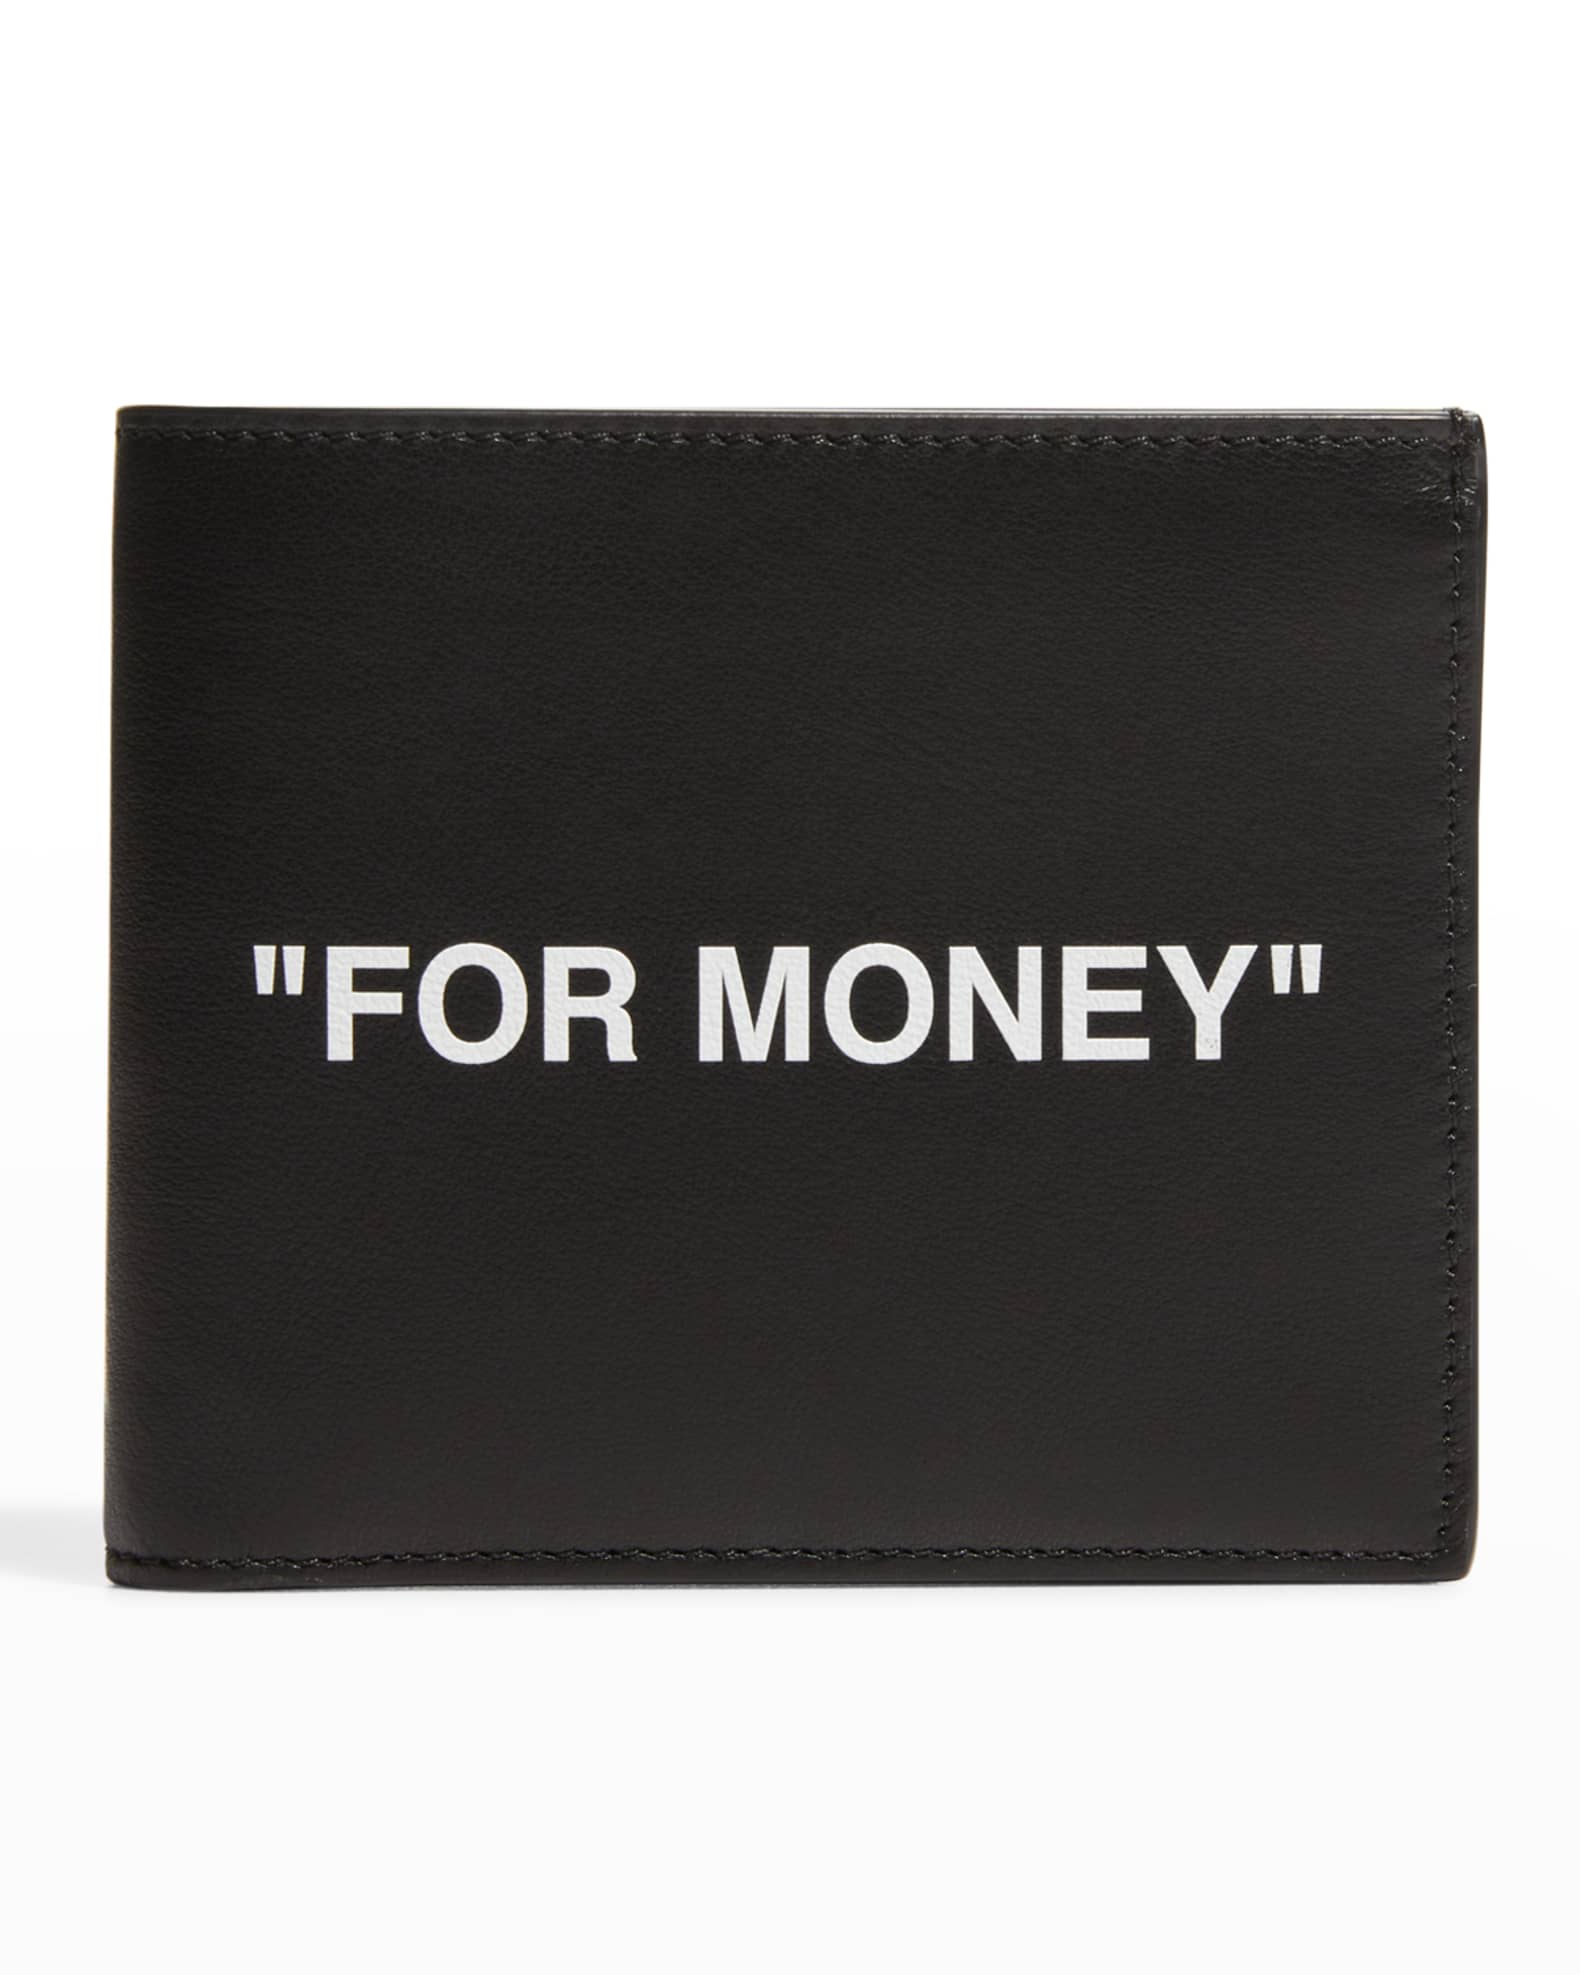 Off-White Men's for Money Leather Bifold Wallet, Black, Men's, Small Leather Goods Billfolds Bifold Trifold Wallets